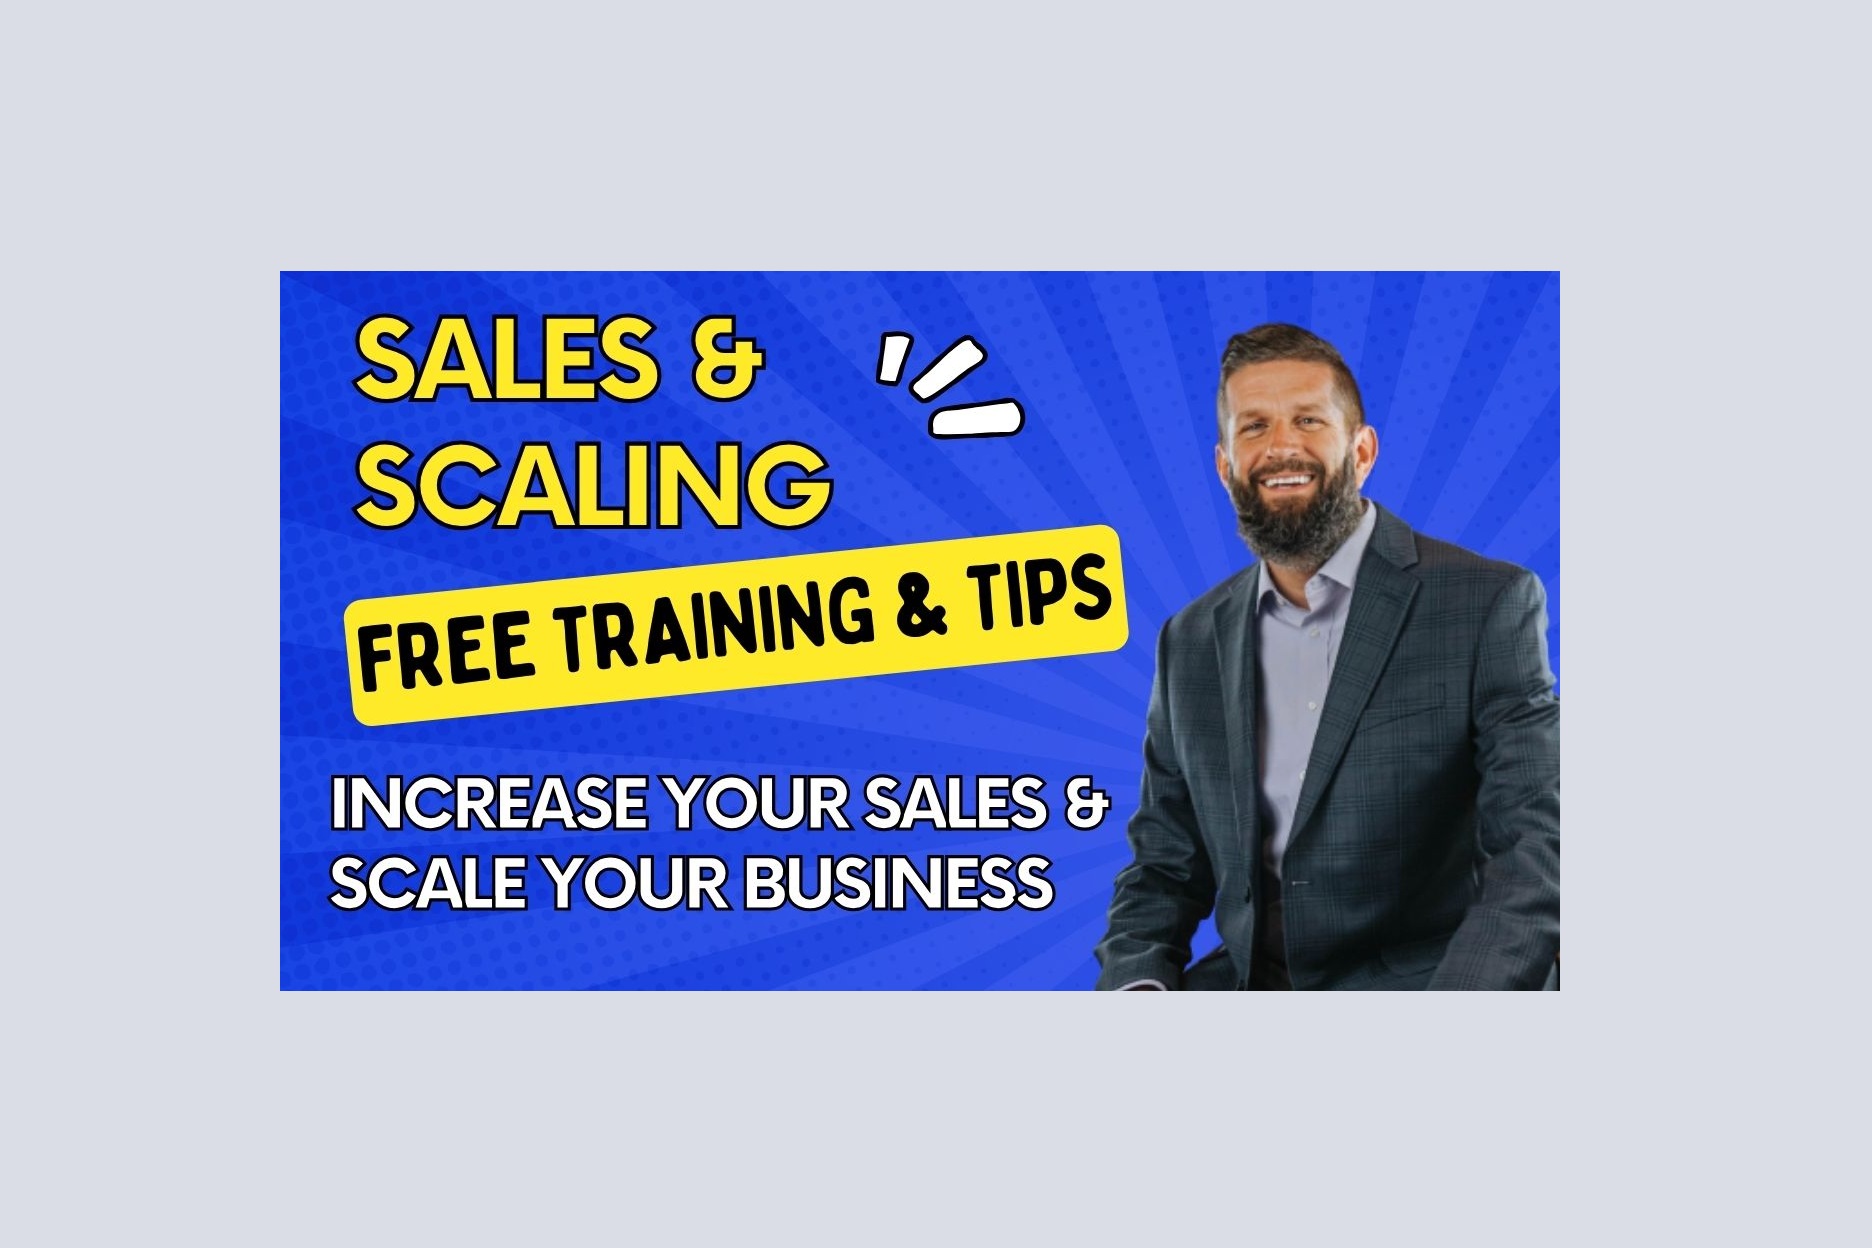 Unlock the Secrets of Sales-Expert Trainer Offers Free Newsletter on Persuasion and Scaling Businesses